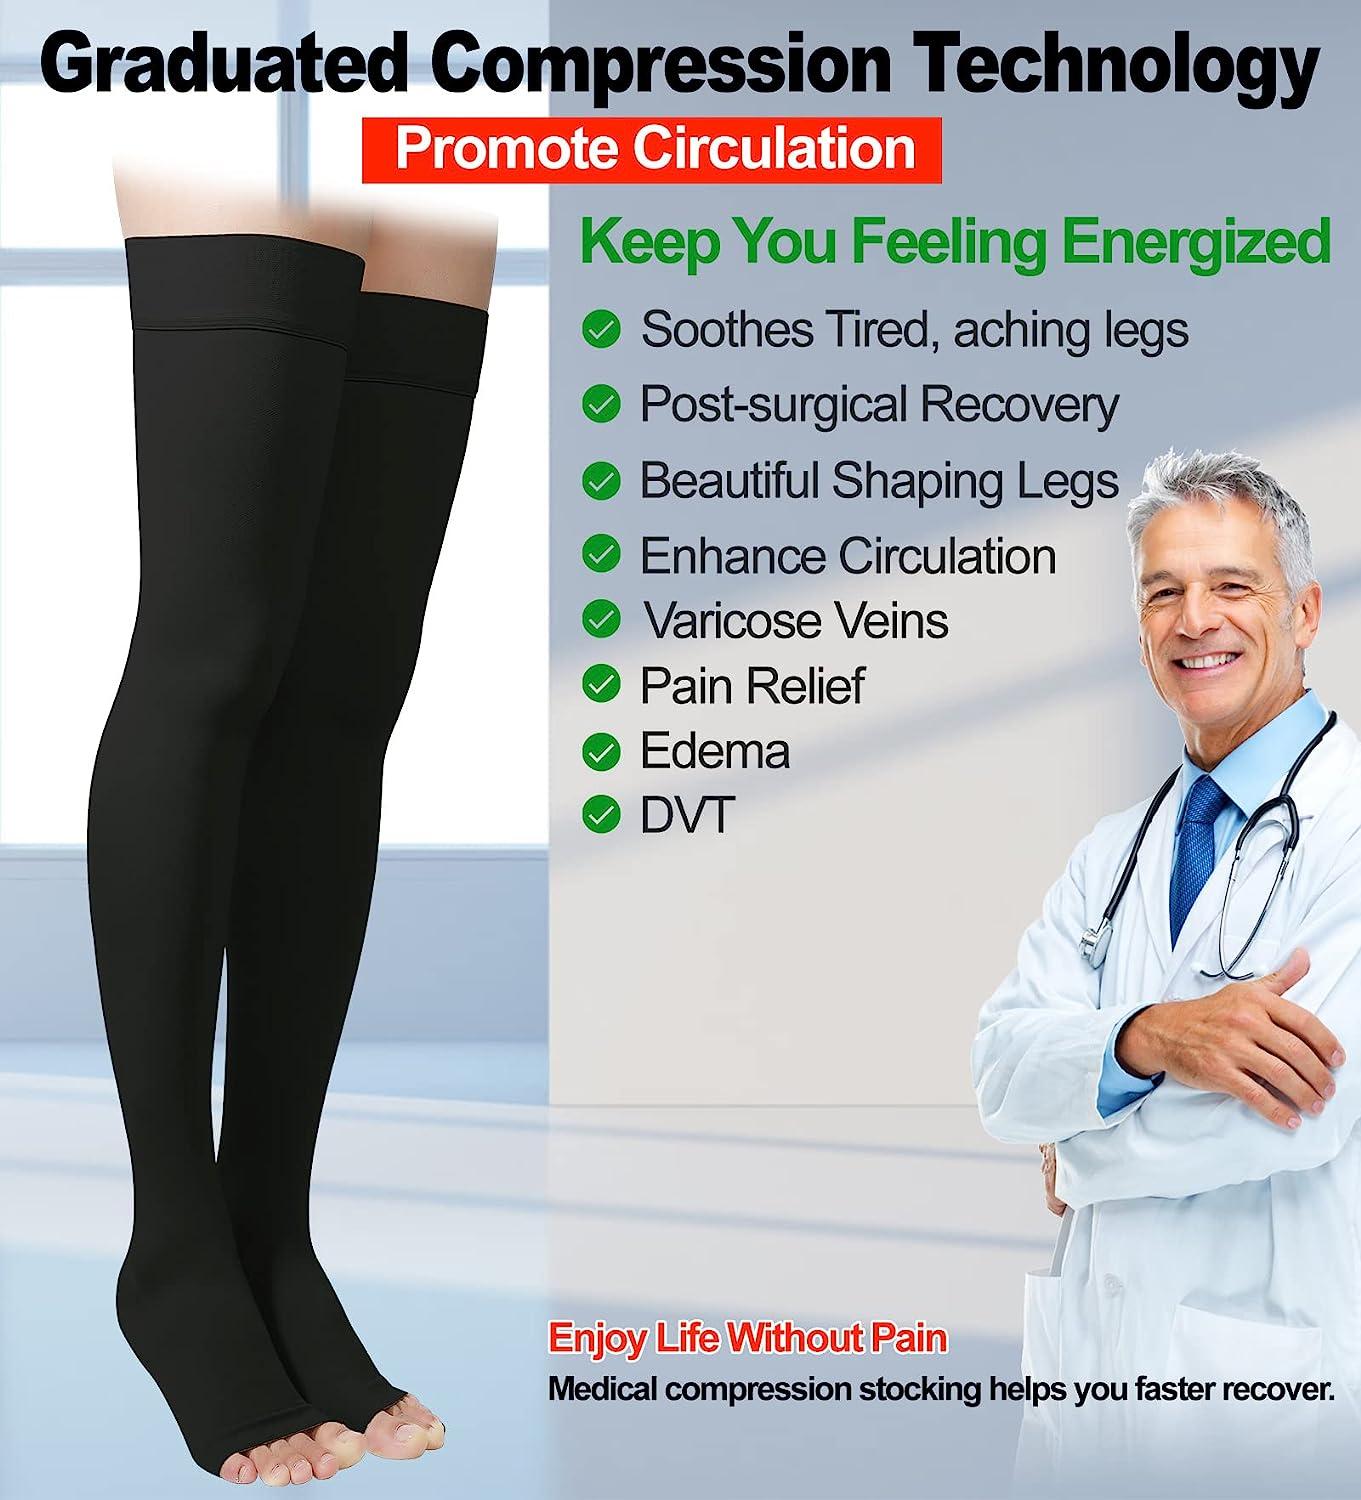 Dr. San Thigh High Compression Stockings, Open Toe, Pair, Firm Support  20-30mmHg Gradient Compression Socks with Silicone Band, Unisex, Opaque,  Spider & Varicose Veins, Edema, Swelling Large 2 Pack 